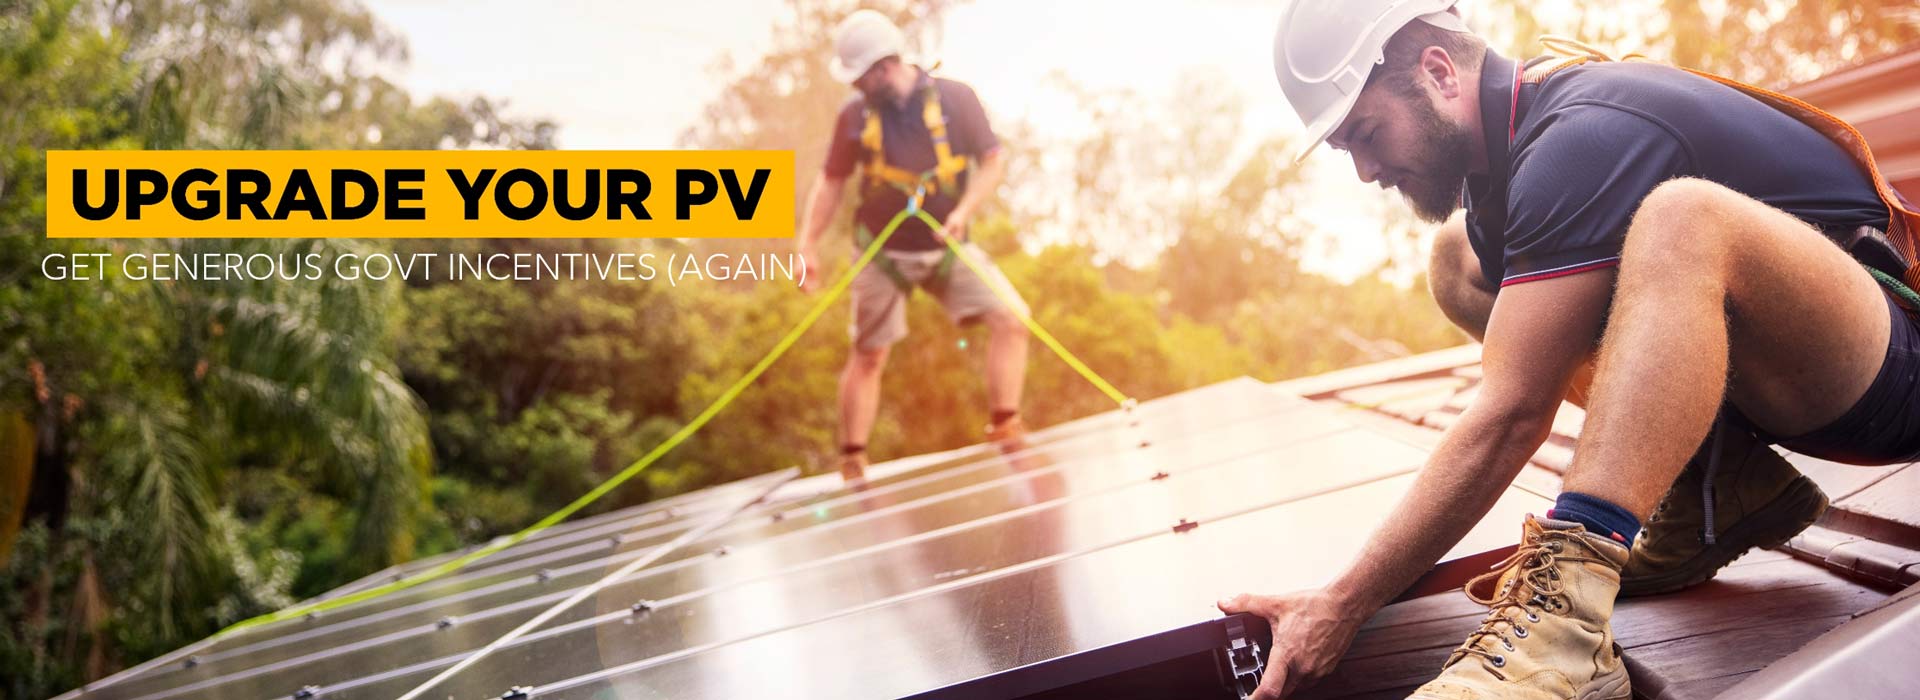 Upgrade your PV to a new, efficient solar power system from Solahart Hervey Bay